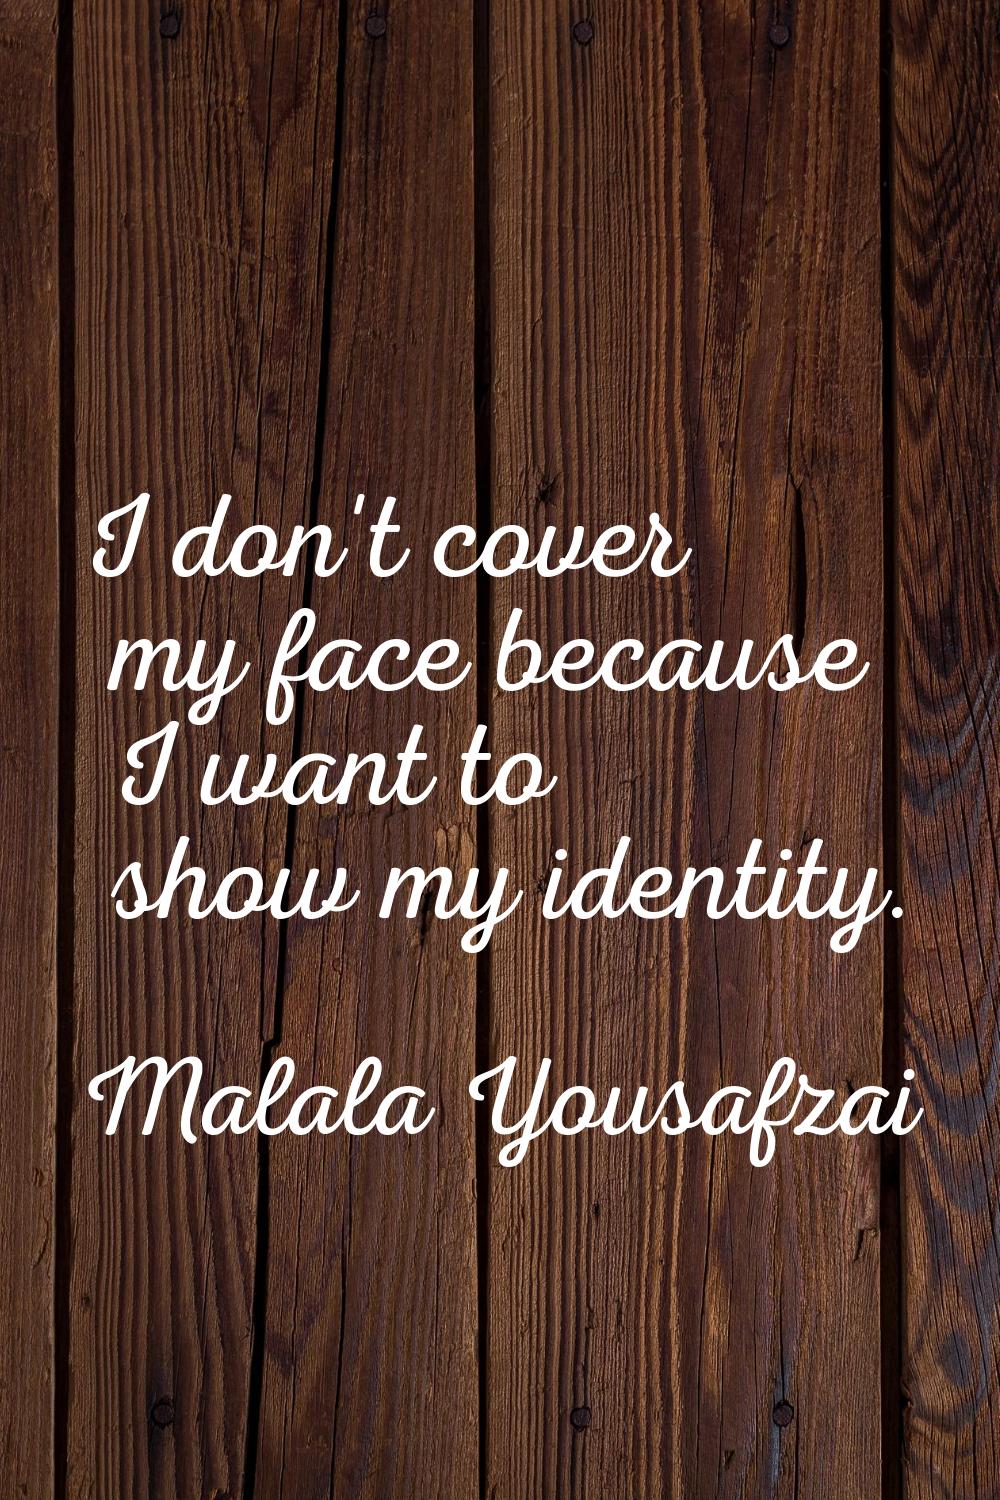 I don't cover my face because I want to show my identity.